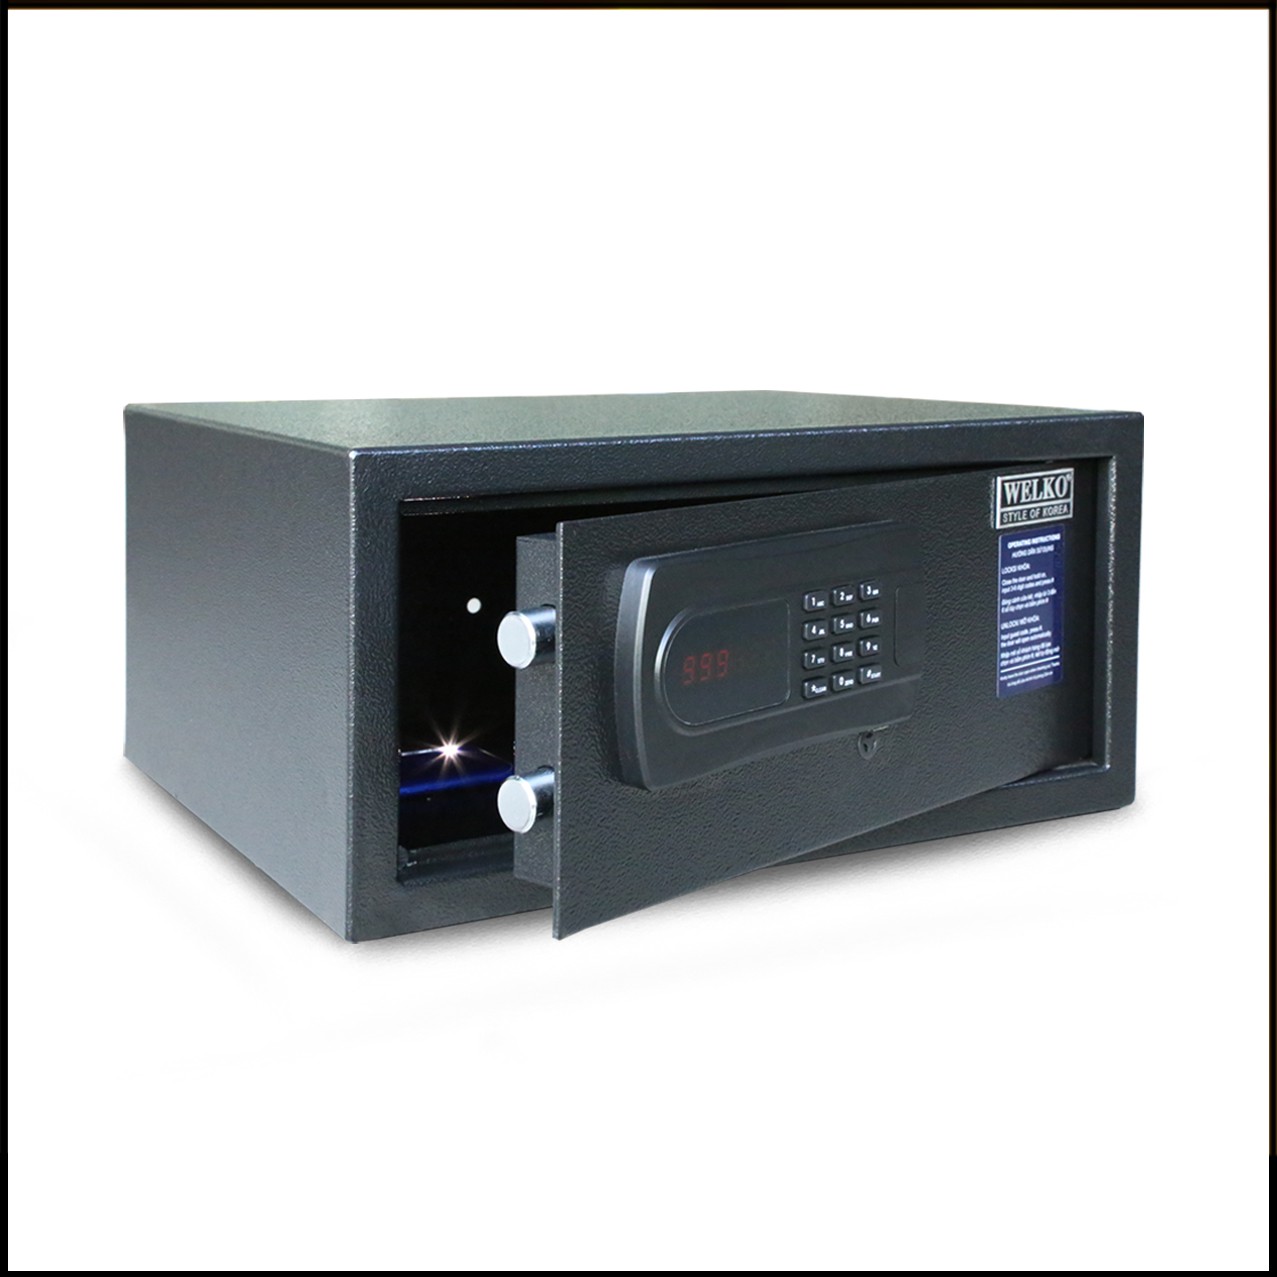 Hotel Safe Brands High Quality Factory Price